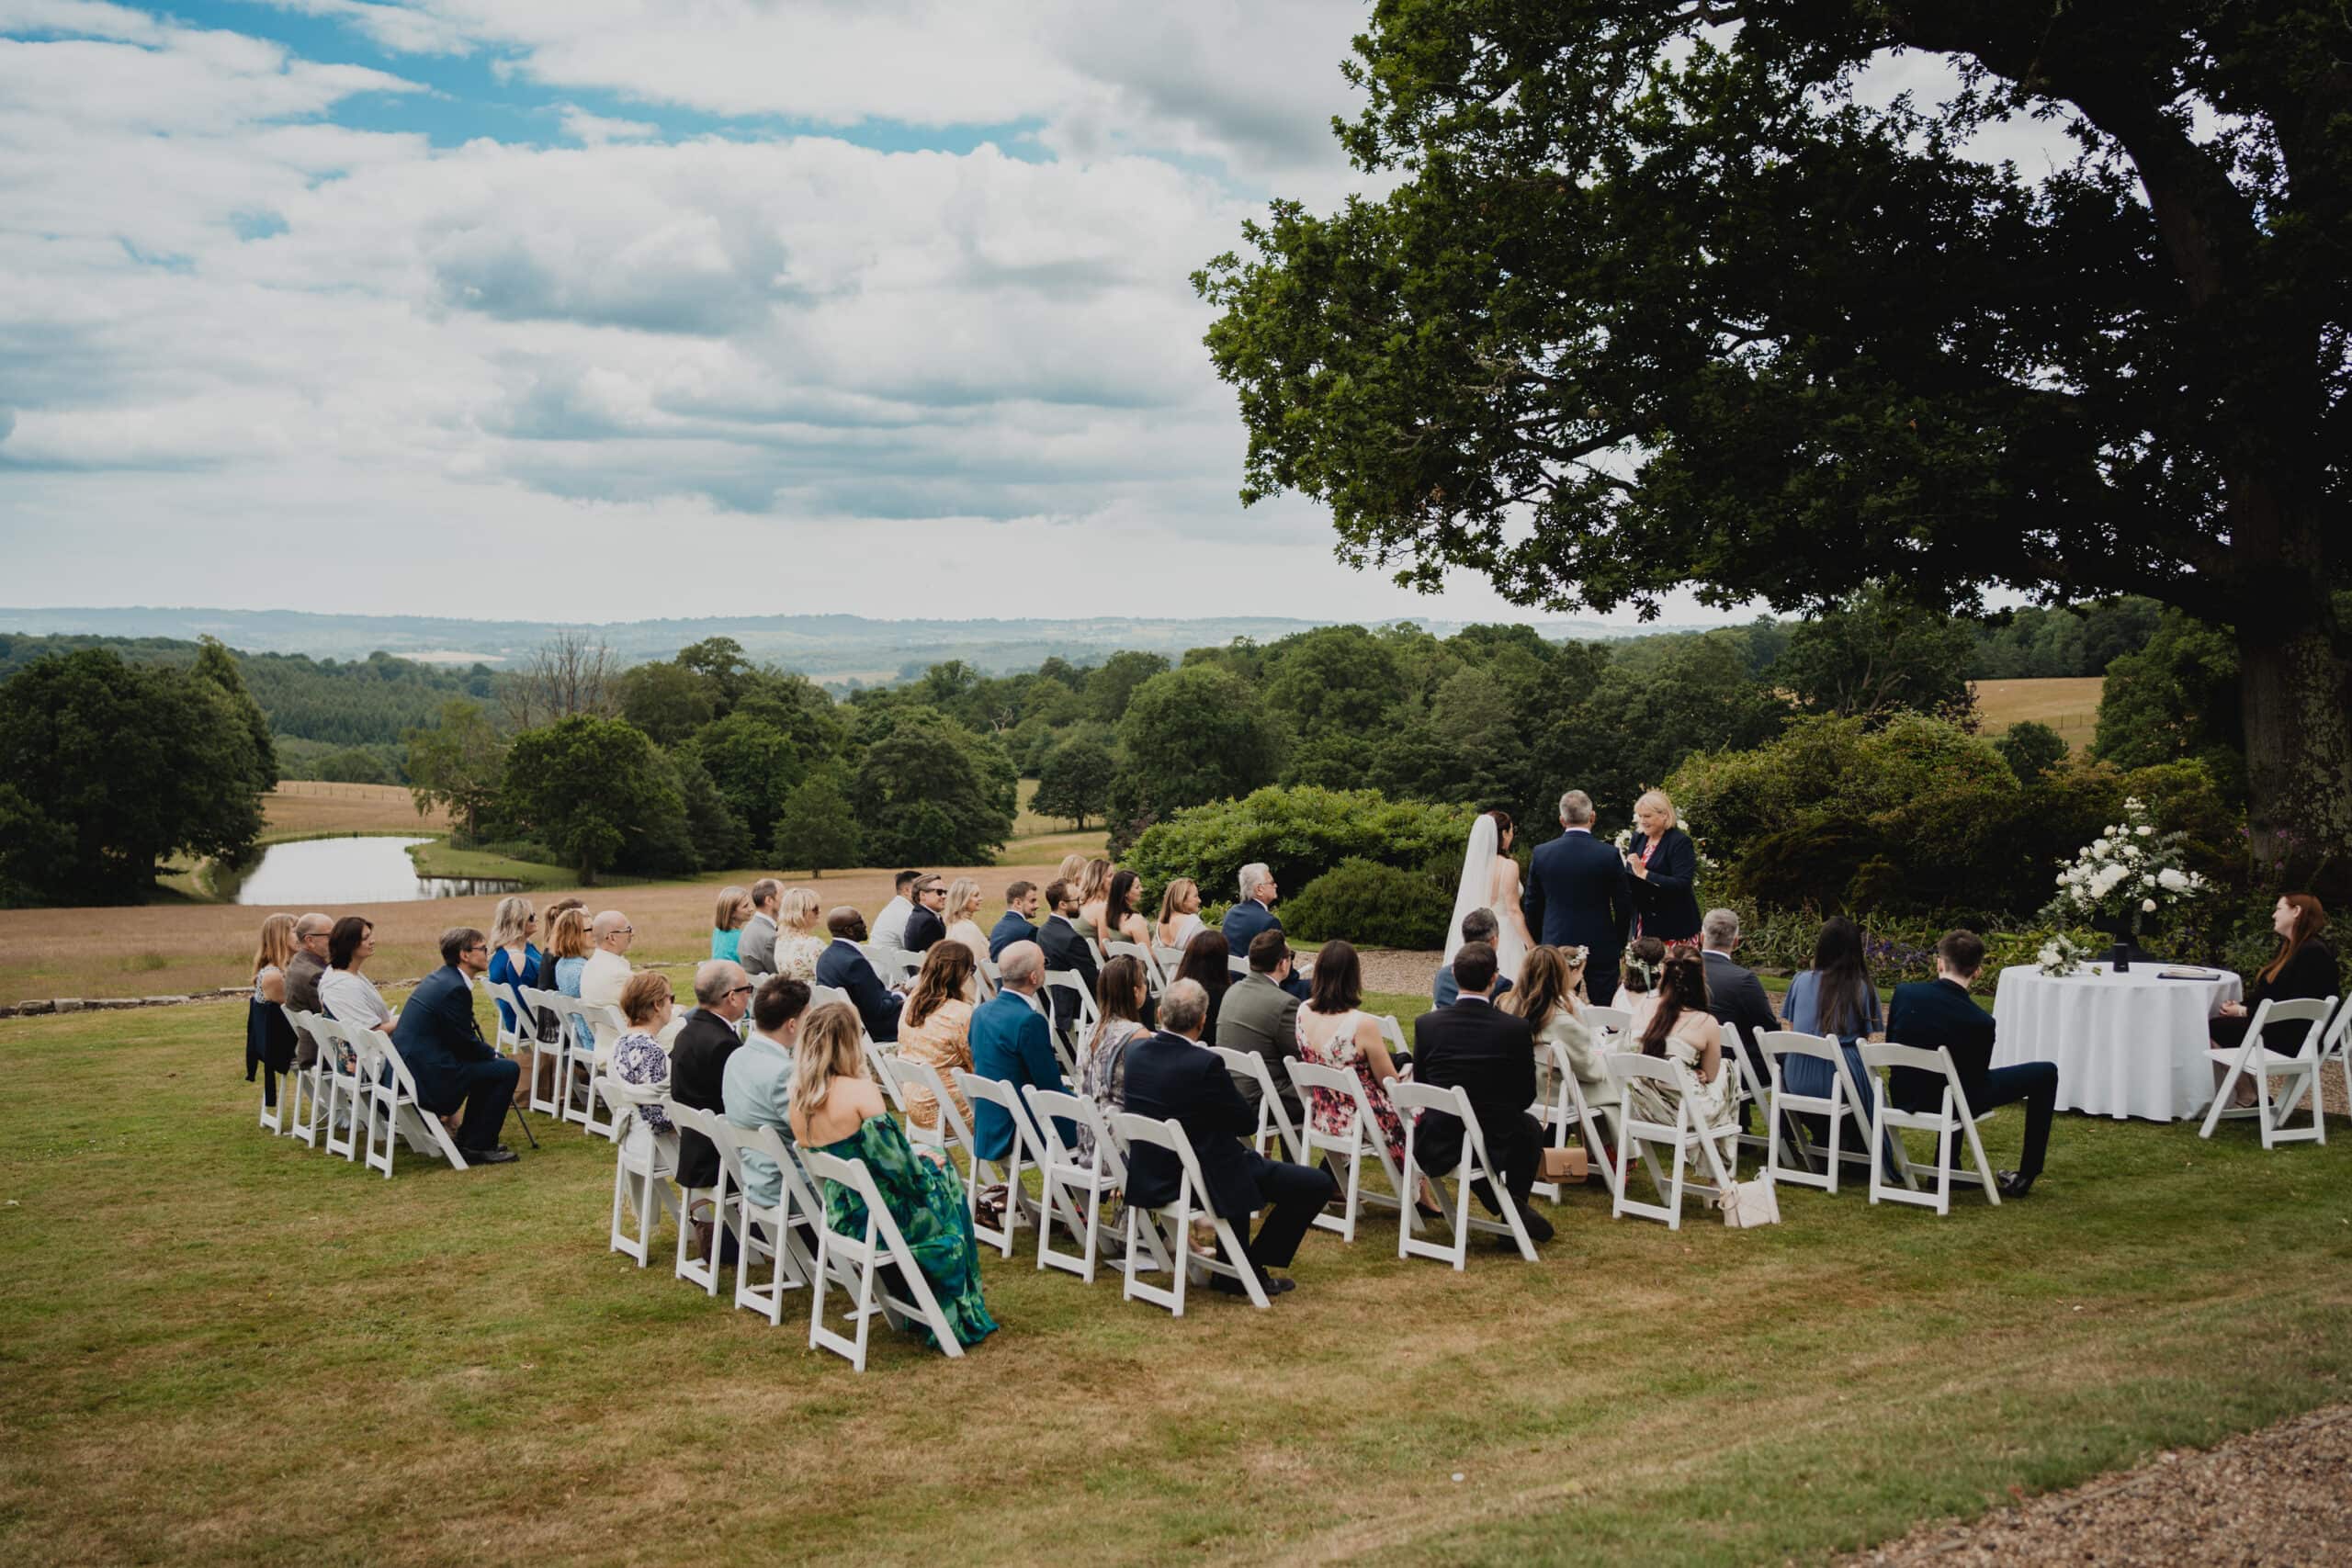 Wedding on the lawn at wadhurst castle in East Sussex